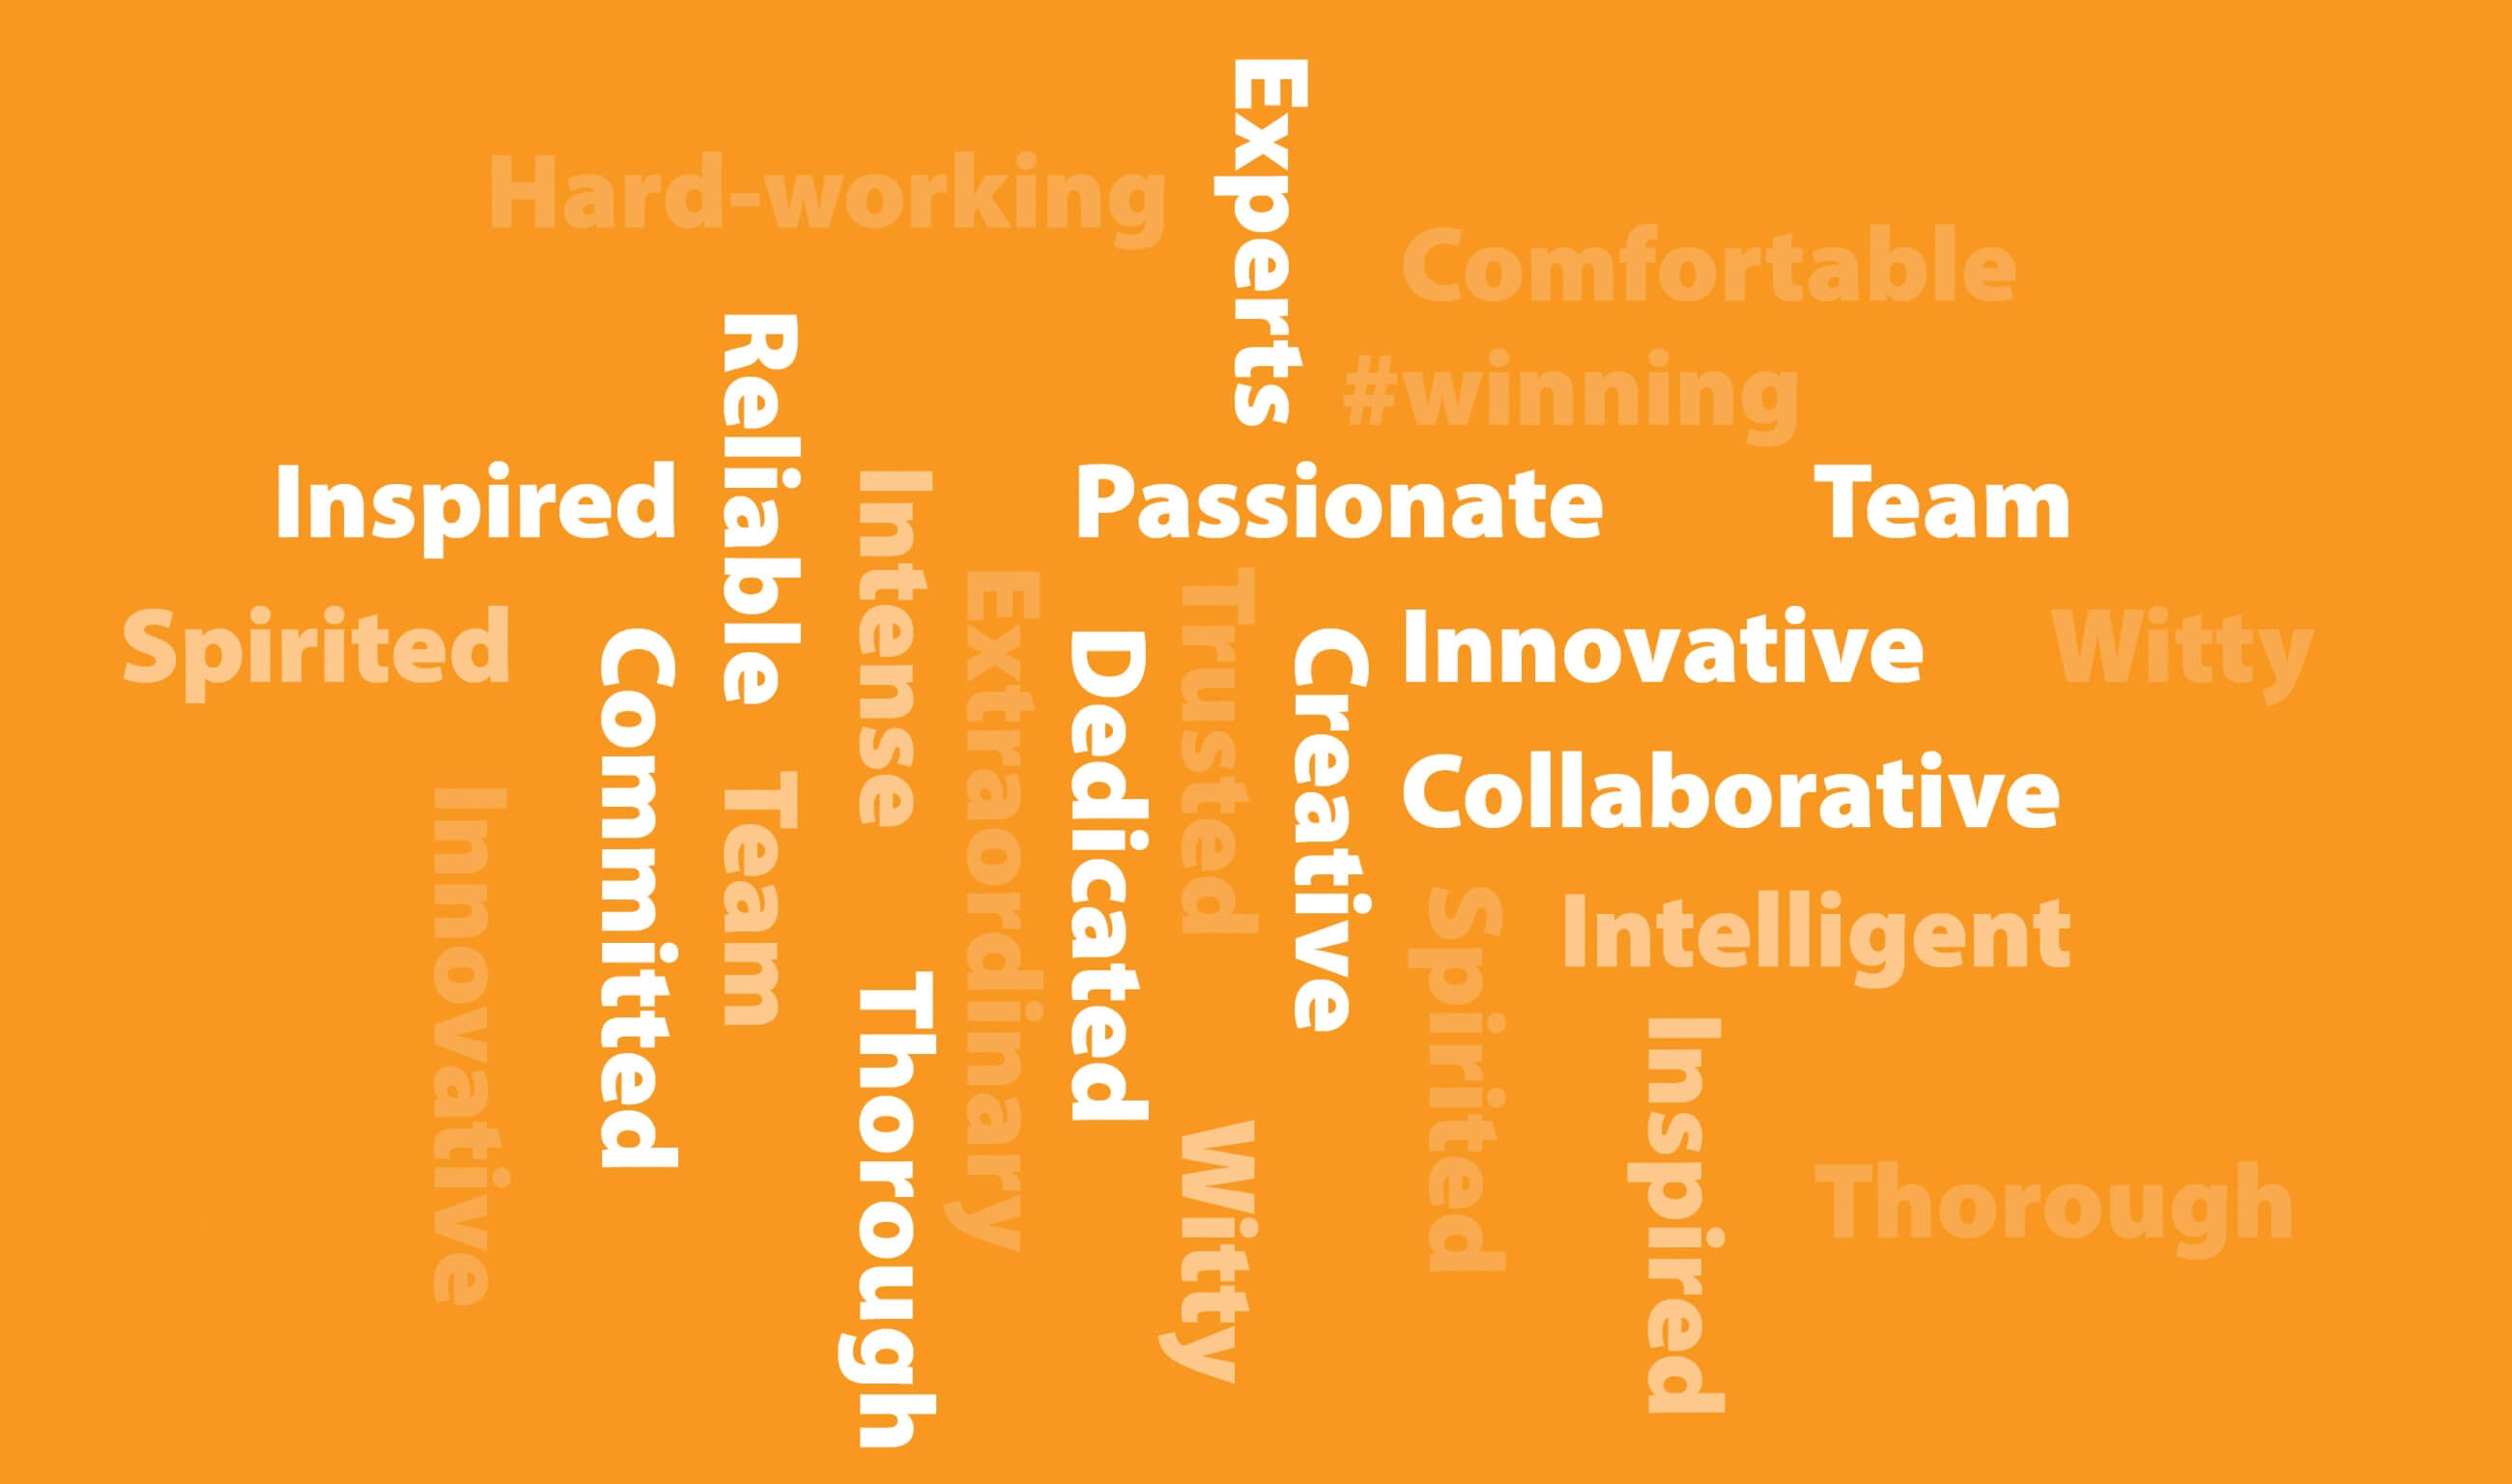 Words that describe our team